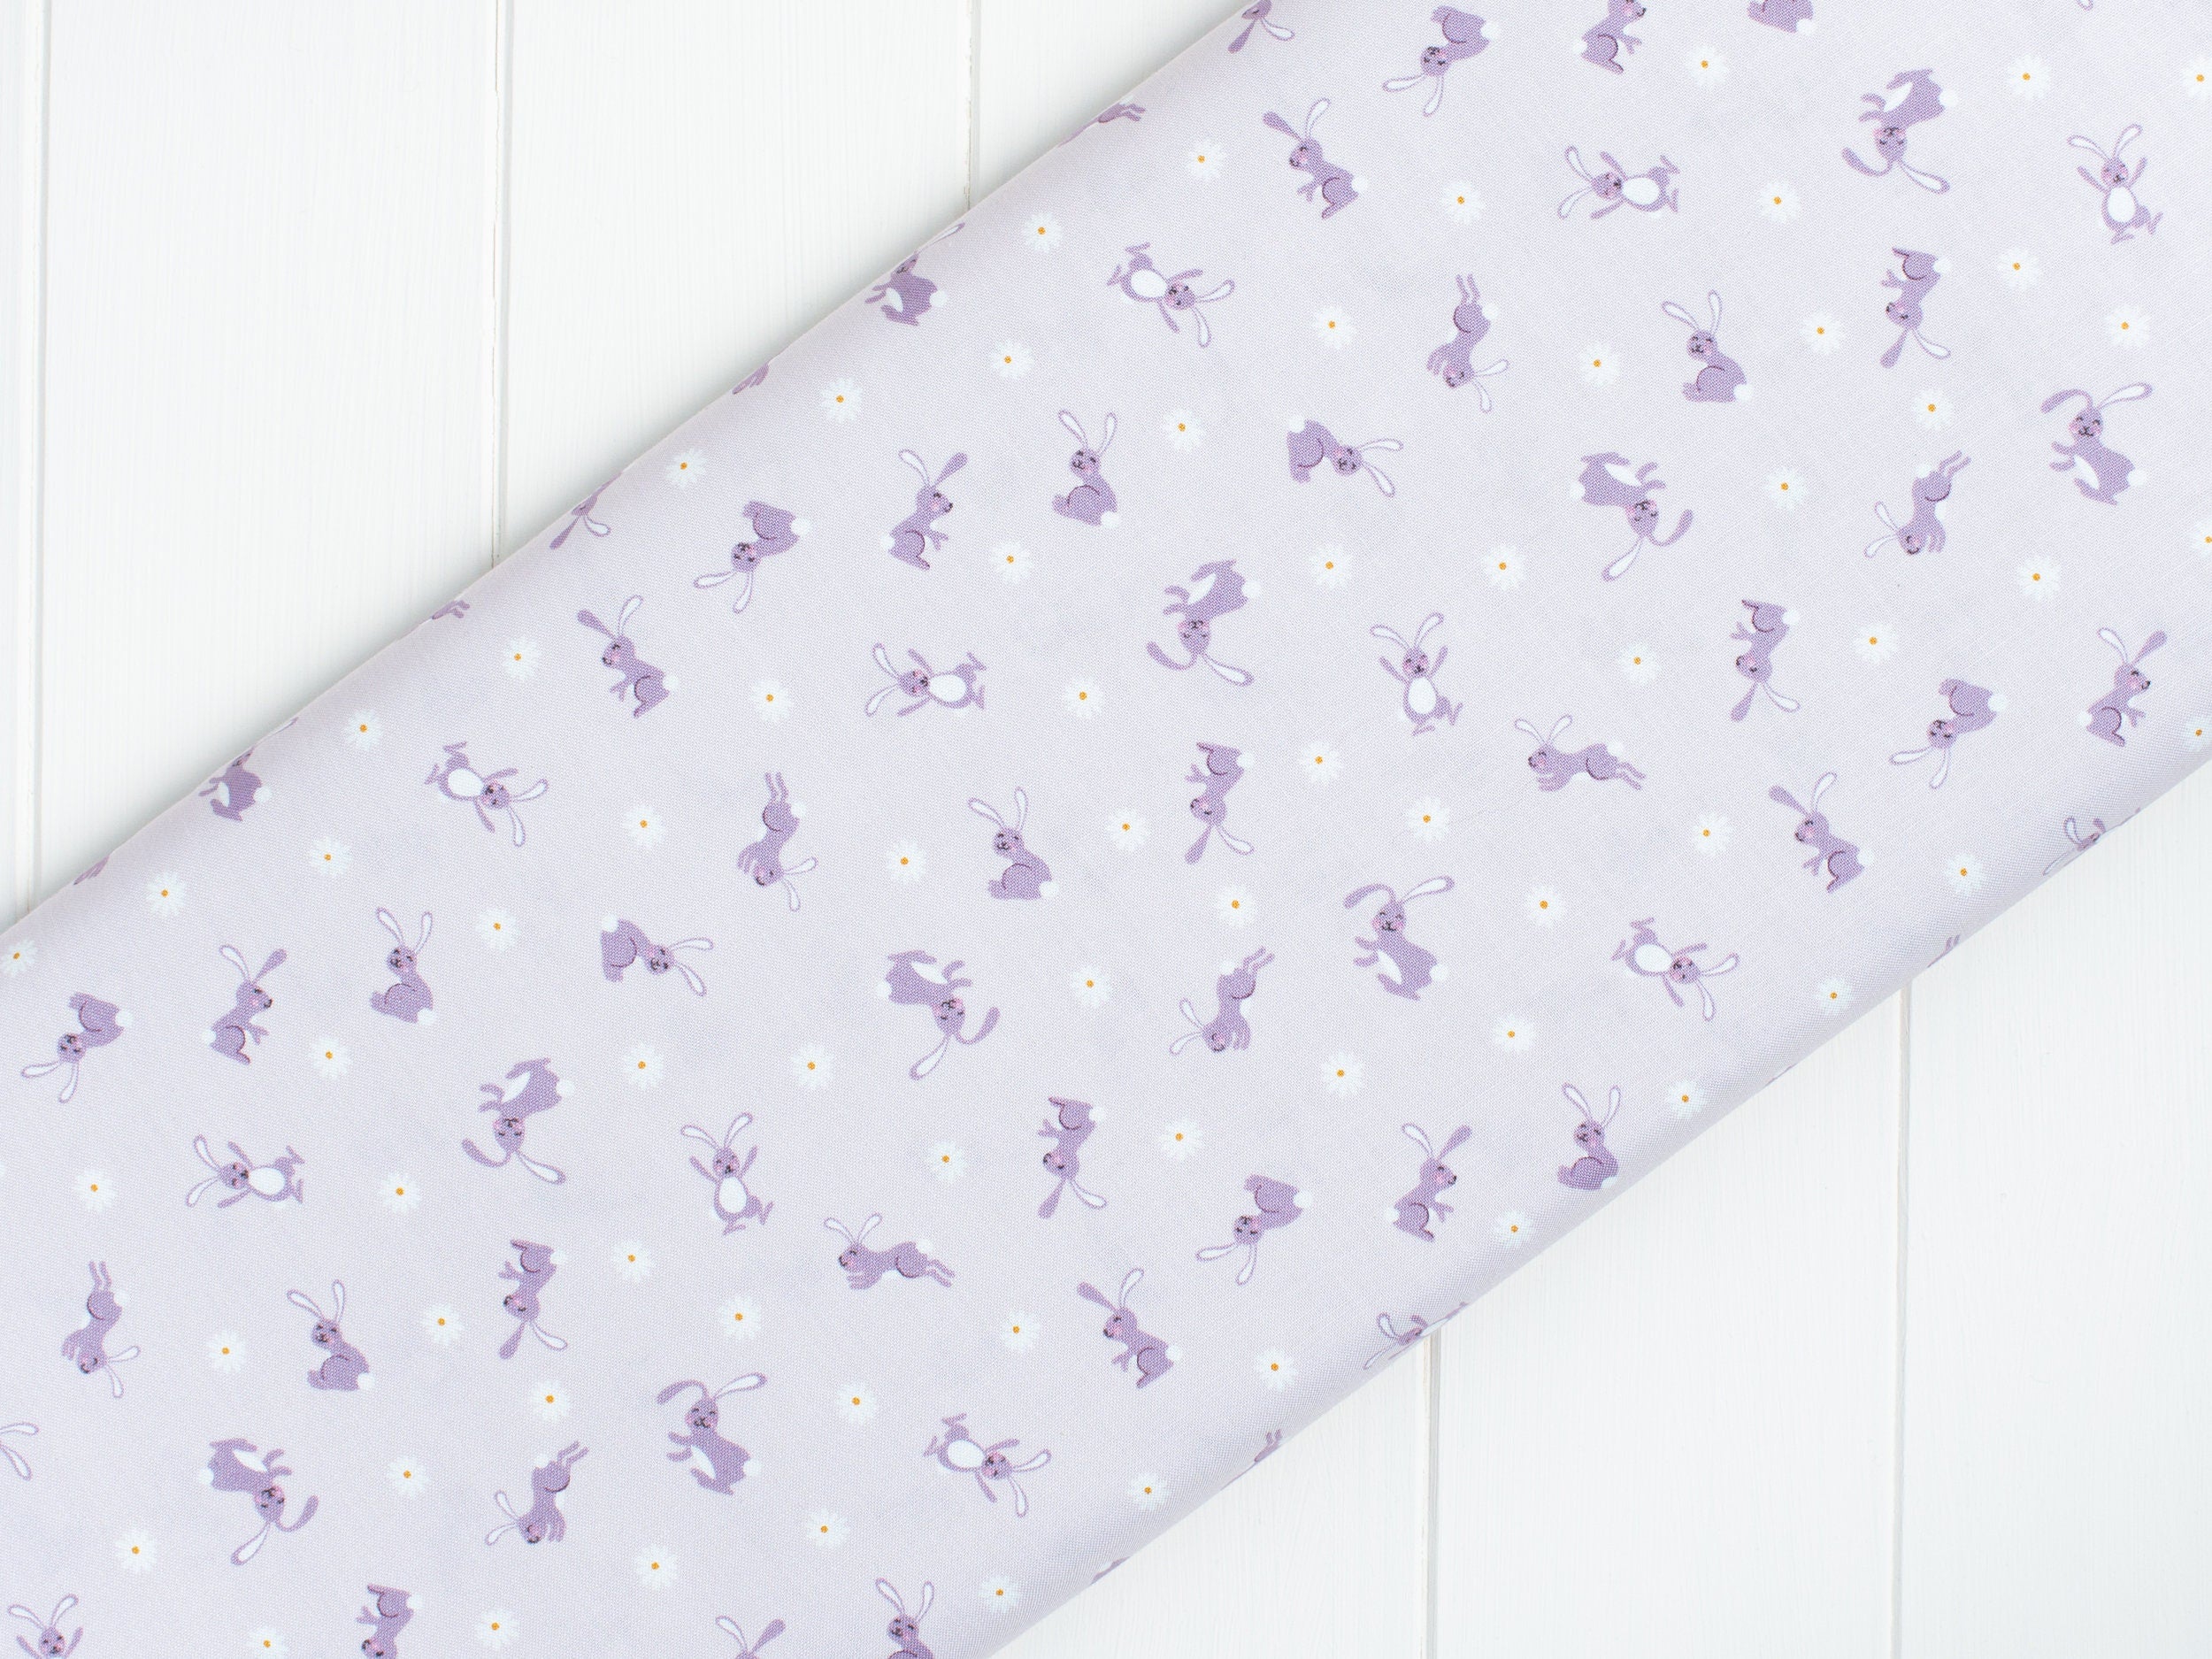 Bunny rabbits daisies dark cream quilting cotton fabric - Bunny Hop by Lewis & Irene